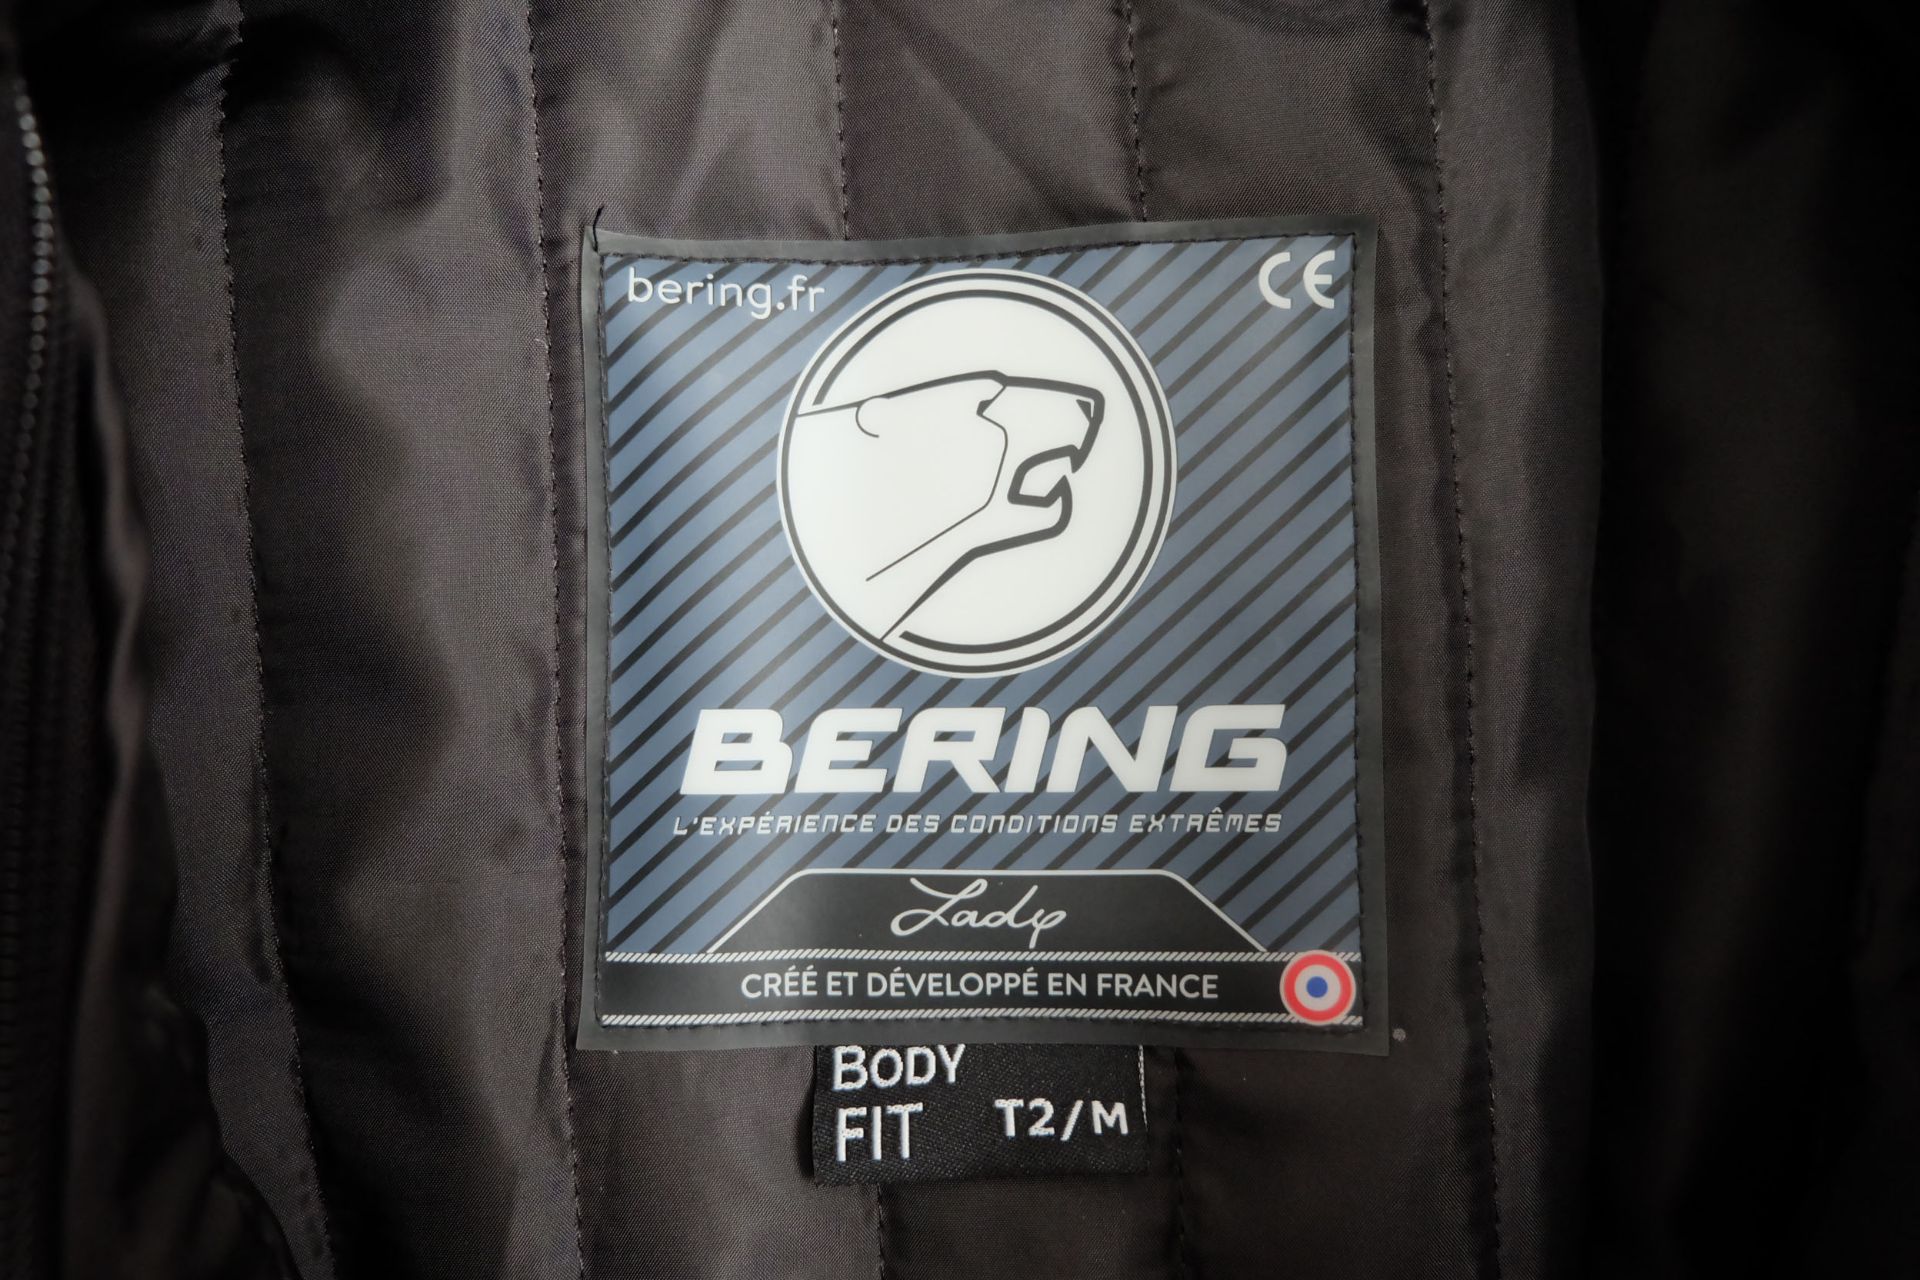 Bering Lady April Women's Waterproof Motorcycle Jacket. Size T2/M. Chest Size 91-94cm. - Image 5 of 9